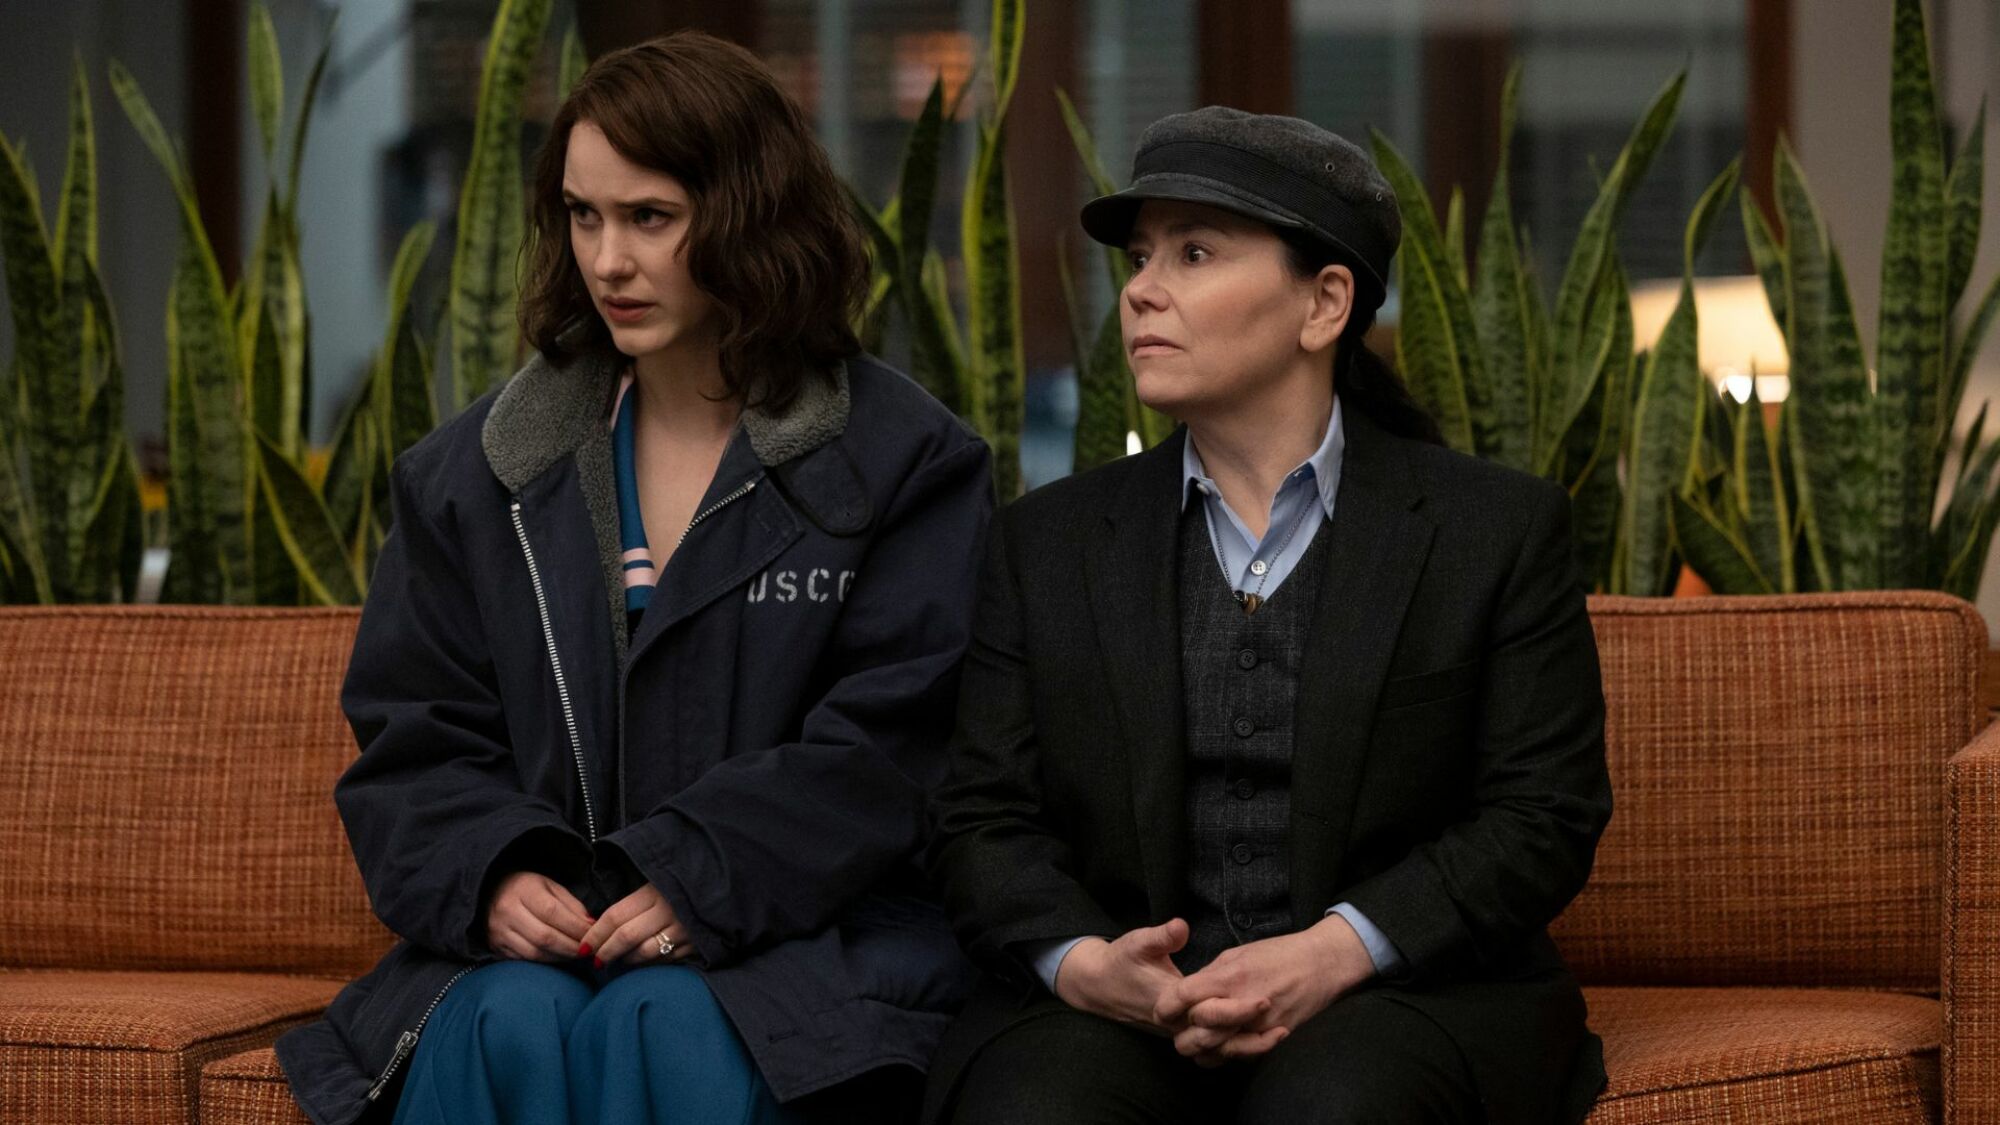 Rachel Brosnahan and Alex Borstein sit on a bench in "The Marvelous Mrs. Maisel."